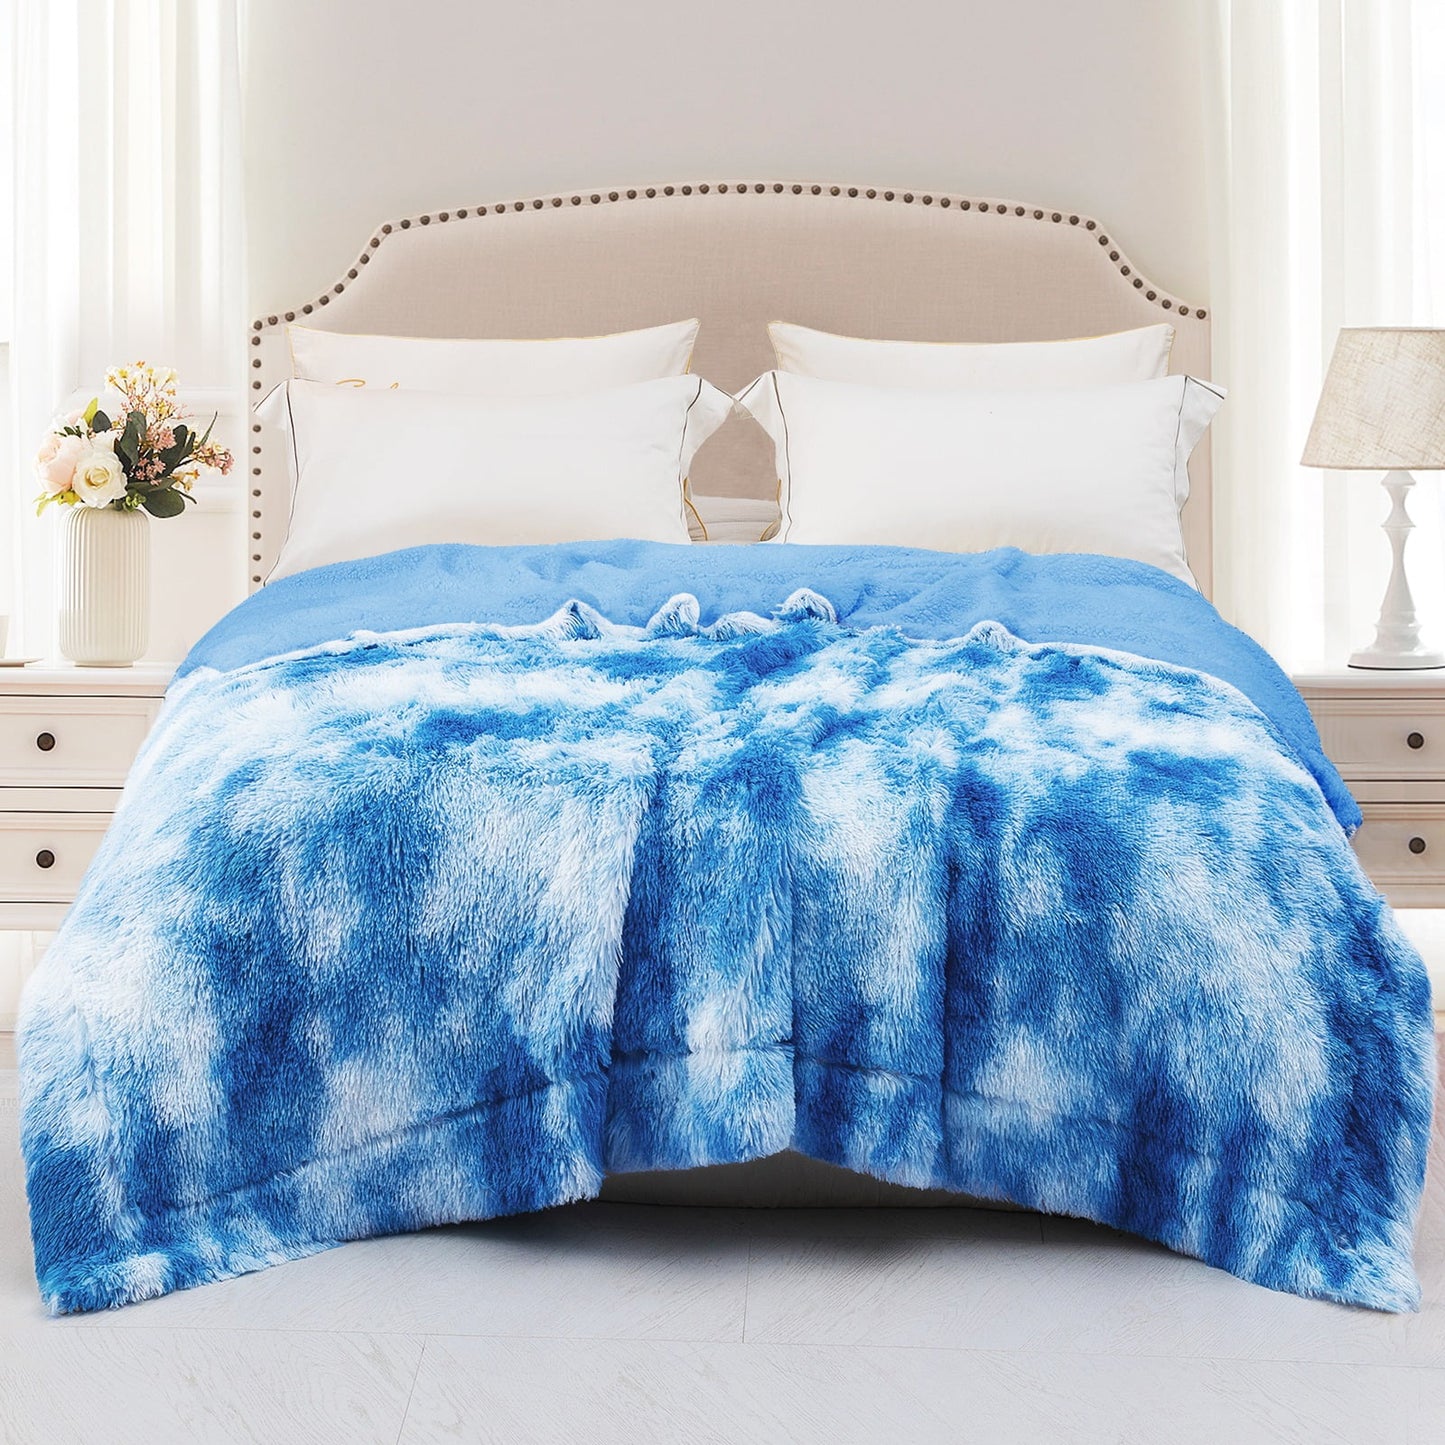 Exclusivo Mezcla Twin Size Faux Fur Bed Blanket, Super Soft Fuzzy and Plush Reversible Sherpa Fleece Blanket and Warm Blankets for Bed, Sofa, Travel, 60X80 inches, Blue